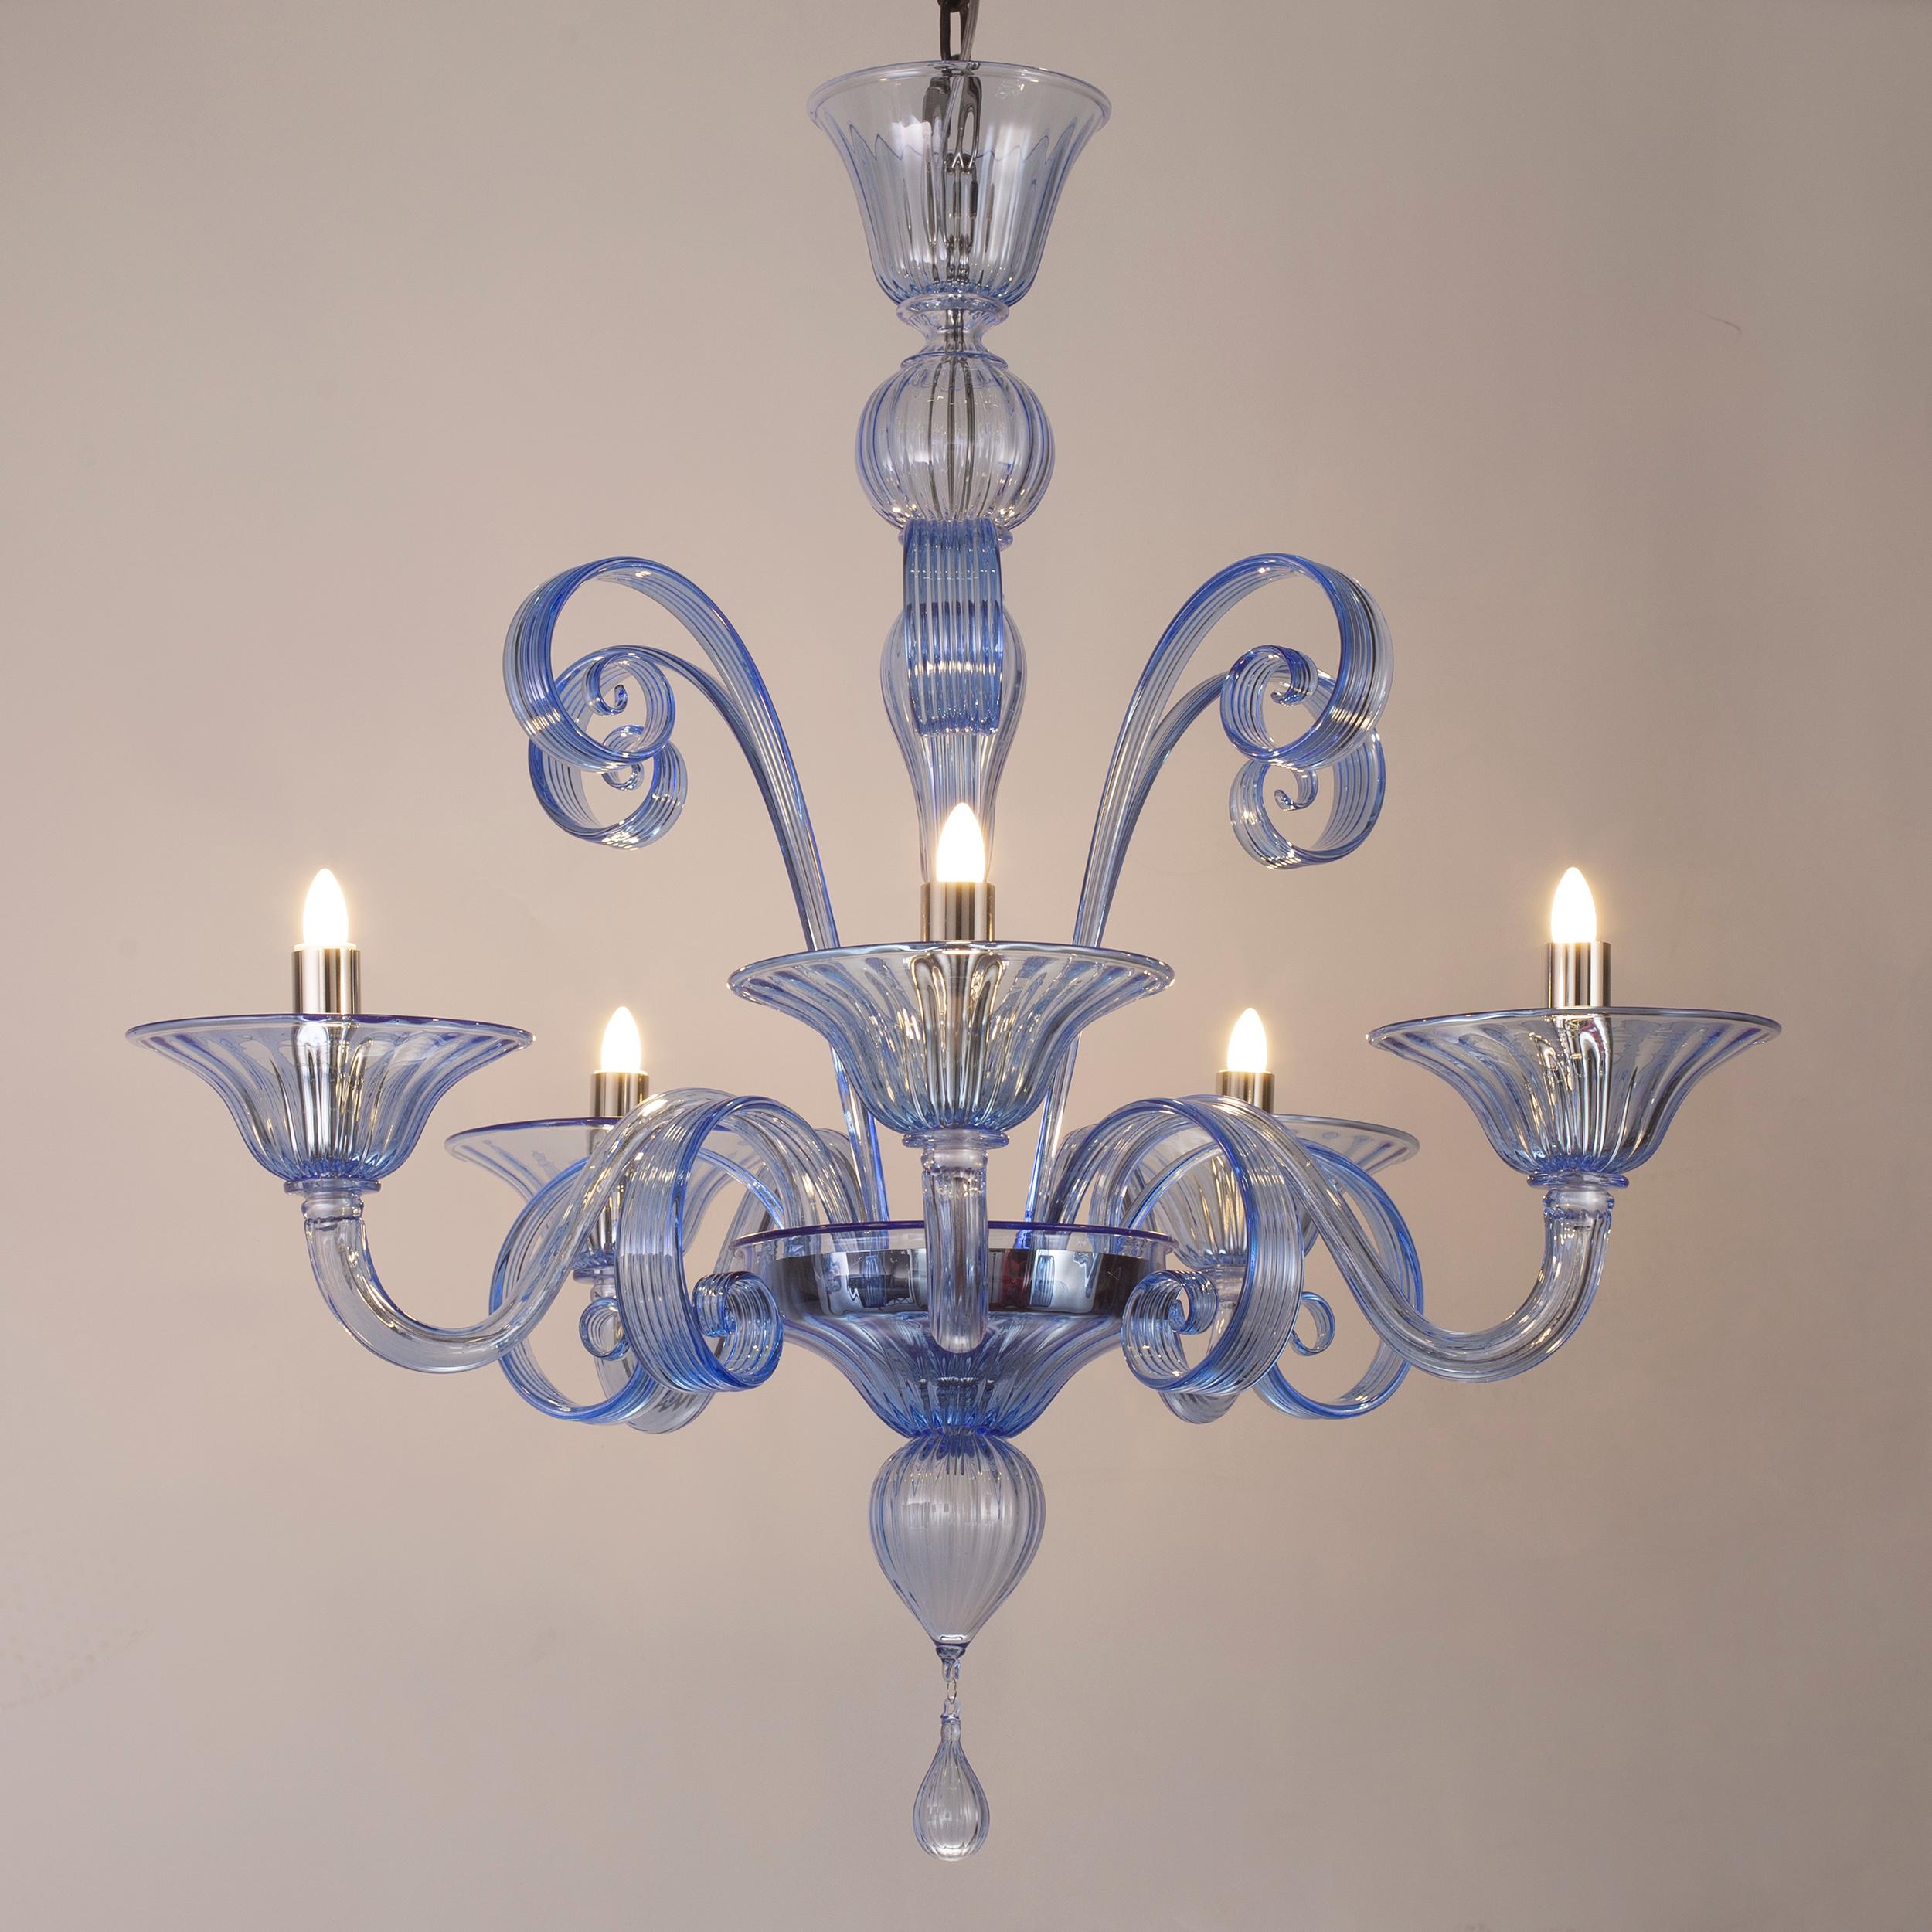 Capriccio by Multiforme is a 5 lights chandelier, in blue artistic glass, with curly ornamental elements.
Inspired by the Classic Venetian tradition it is characterized by a central column where many blown glass “pastoral” elements are installed.